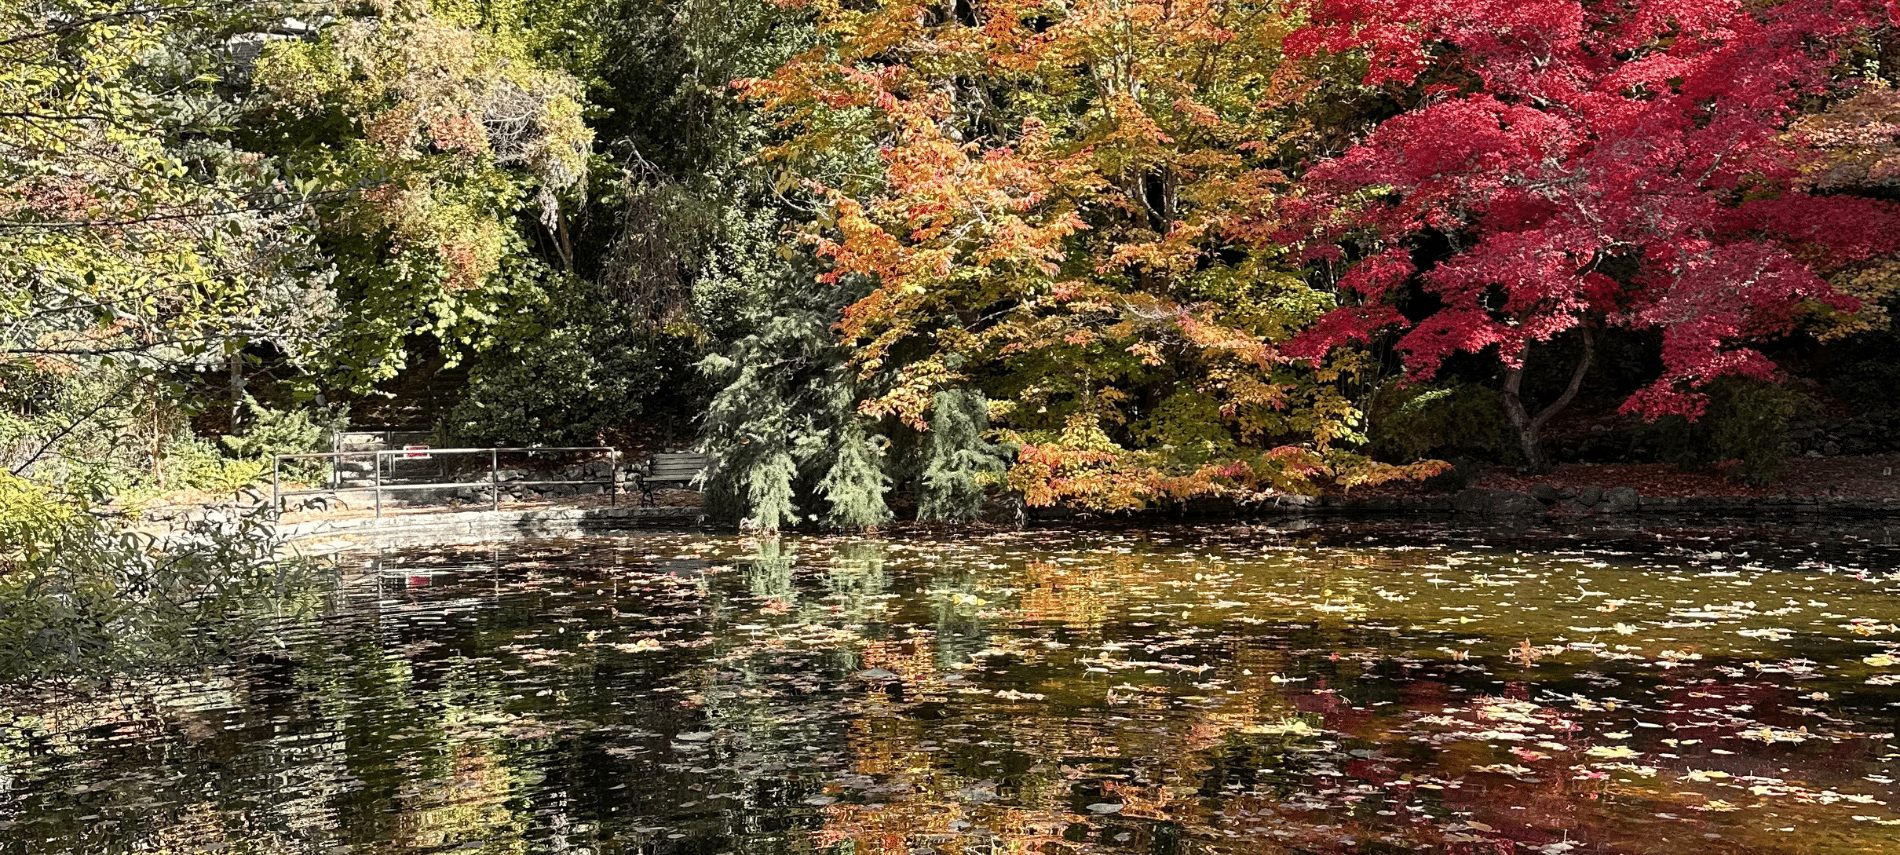 Lithia Park and the Duck Pond in beautiful Ashland Oregon